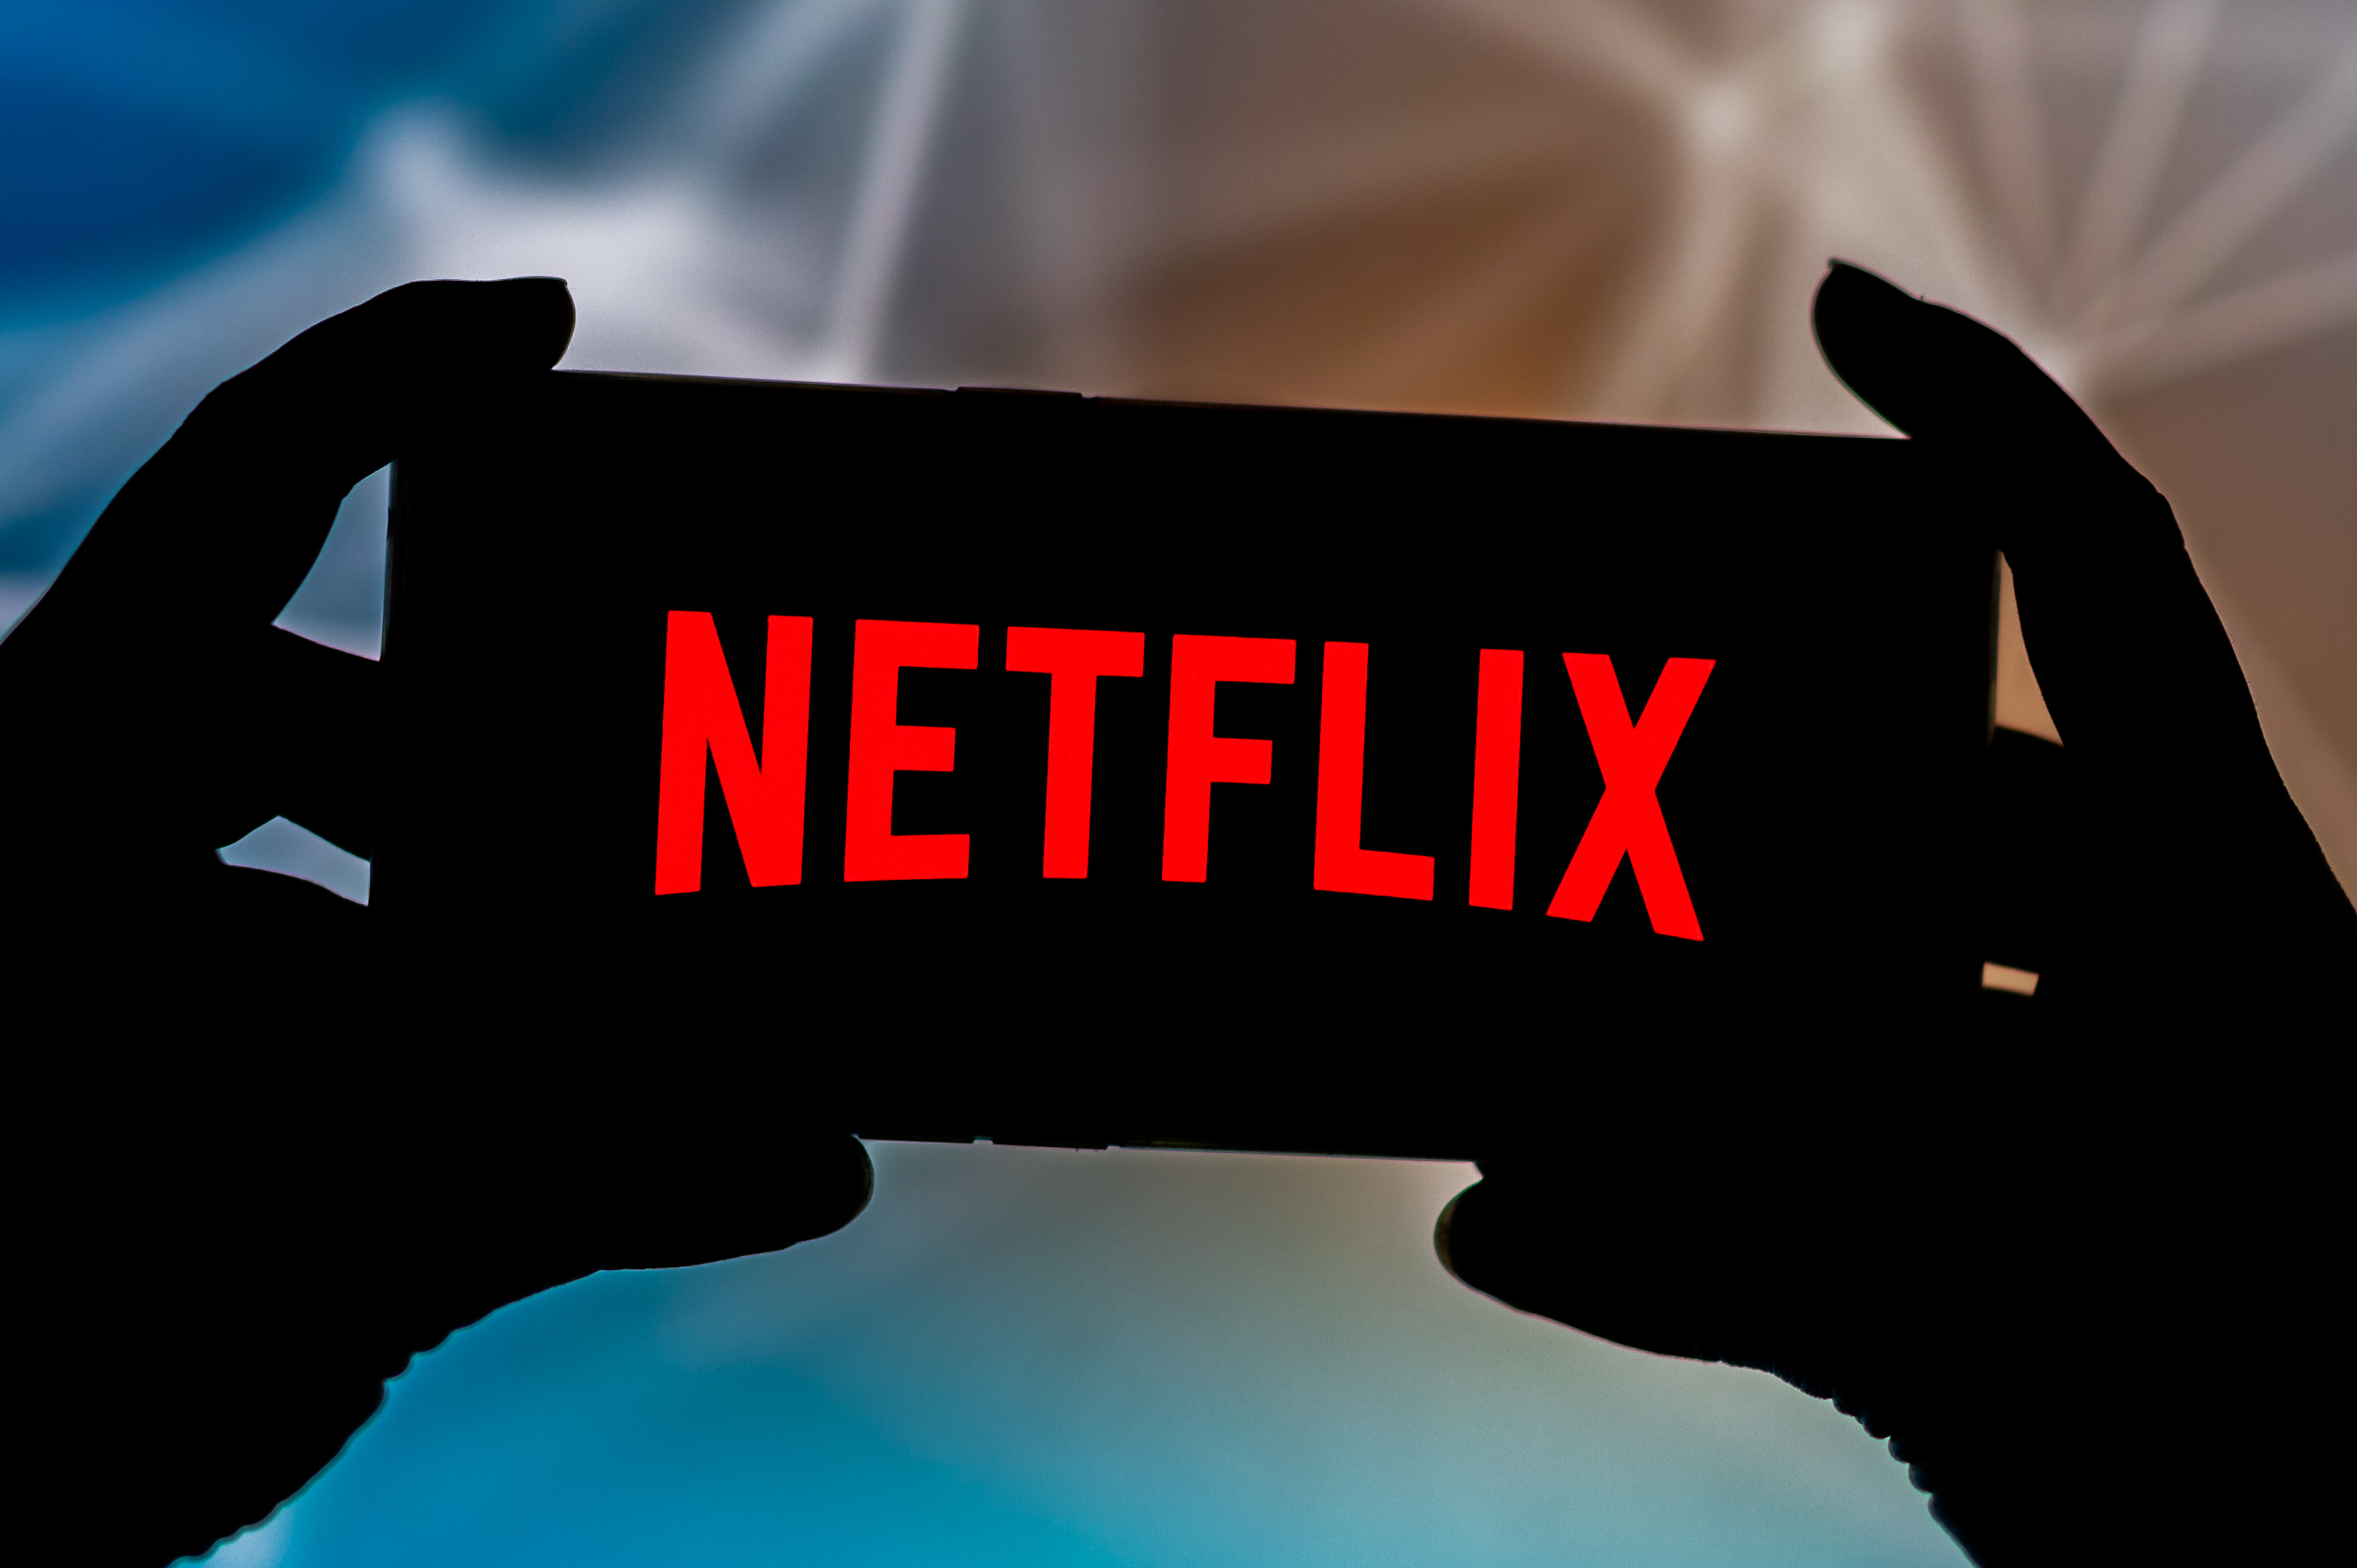 The Netflix logo seen displayed on a smartphone. Netflix shipped its first DVD in 1998